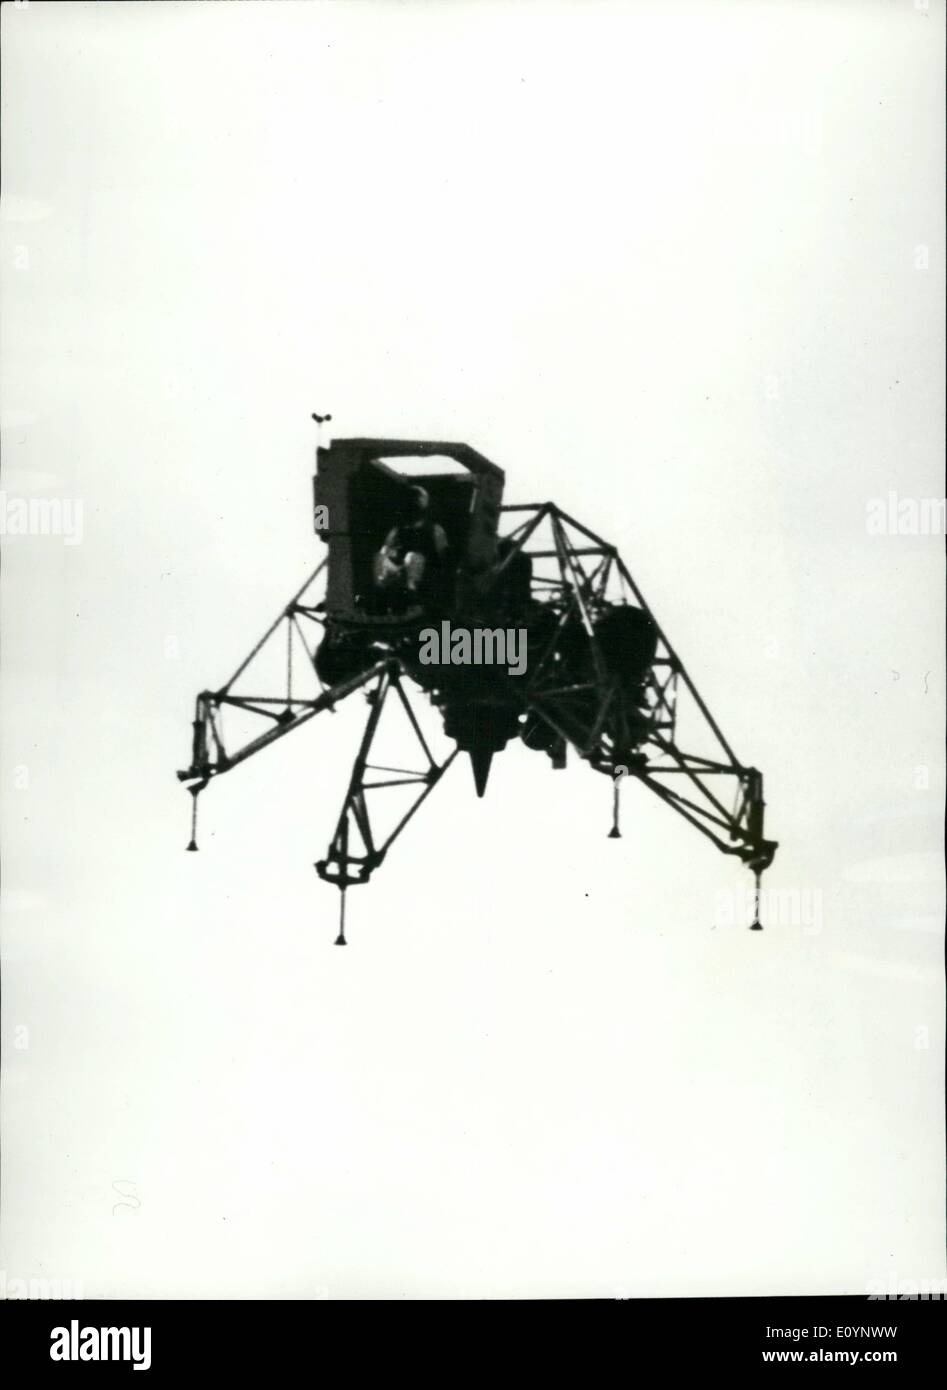 Jan. 01, 1971 - Apollo 14 LLTV flight: A Lunar Landing Training Vehicle (LLTV), pictured by Astronaut Alan B. Shepard, undergoes a test flight at Ellington Air Force Base. Shepard is the commander of the Apollo 14 lunar landing mission. Shepard used the LLTV to practice lunar landing techniques in preparation for his scheduled mission. The ''Original Seven'' astronaut group member will be at the controls of the Apollo 14 lunar module when it lands on the moon in highlands near Fra Mauro. Astronaut Stuart A Stock Photo